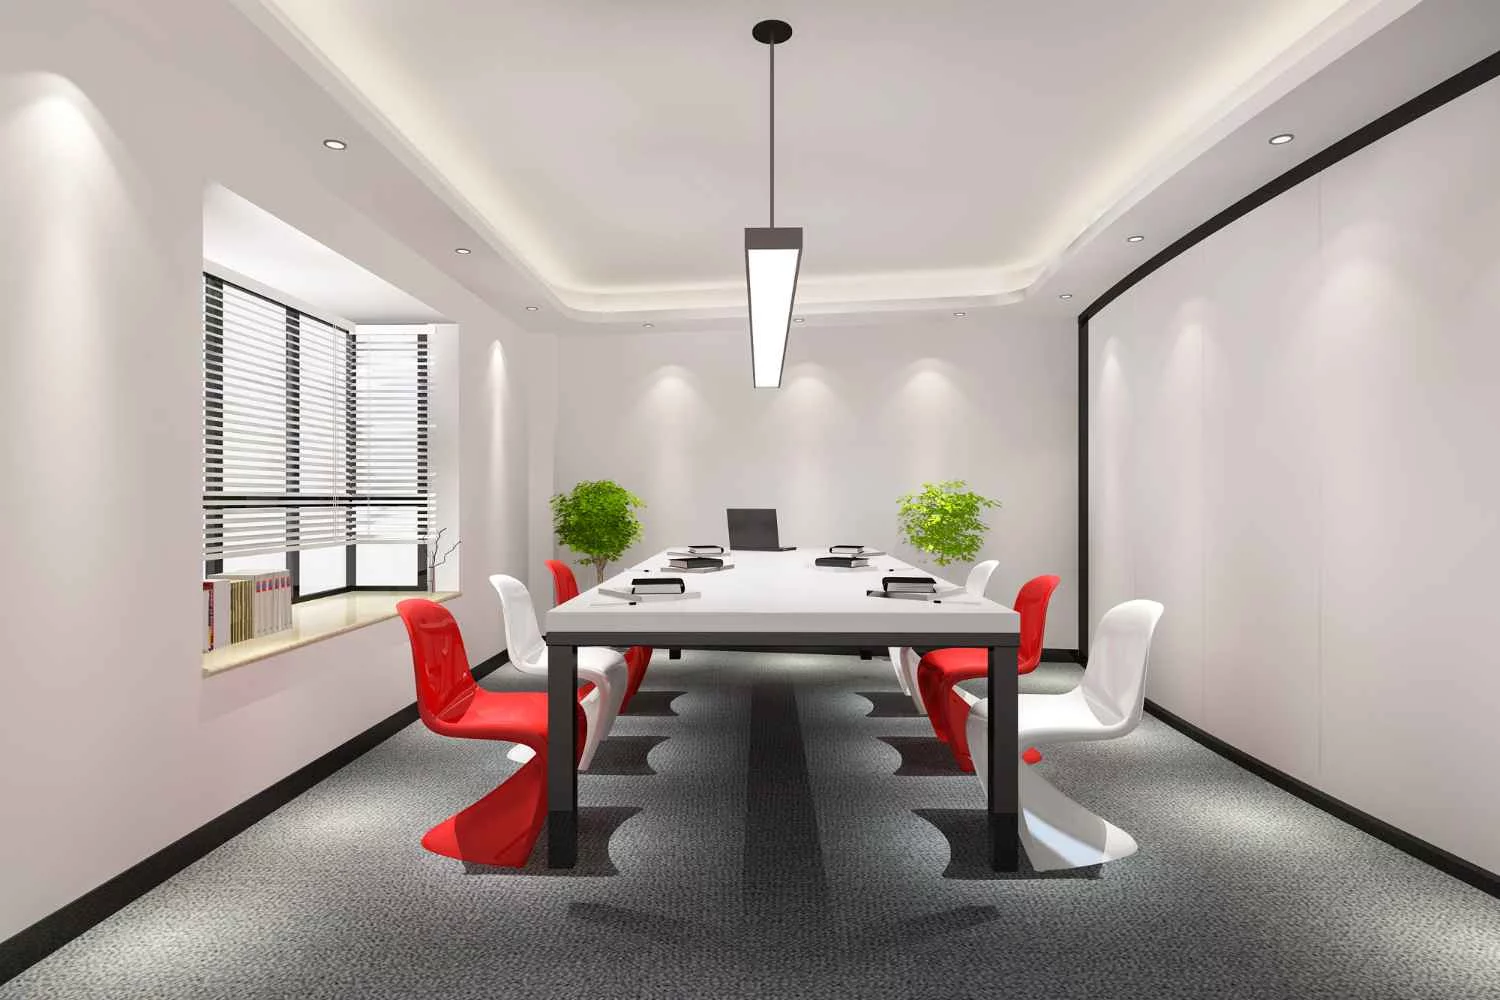 6 Tips to Upgrade New Startup Office’s Interior Design!